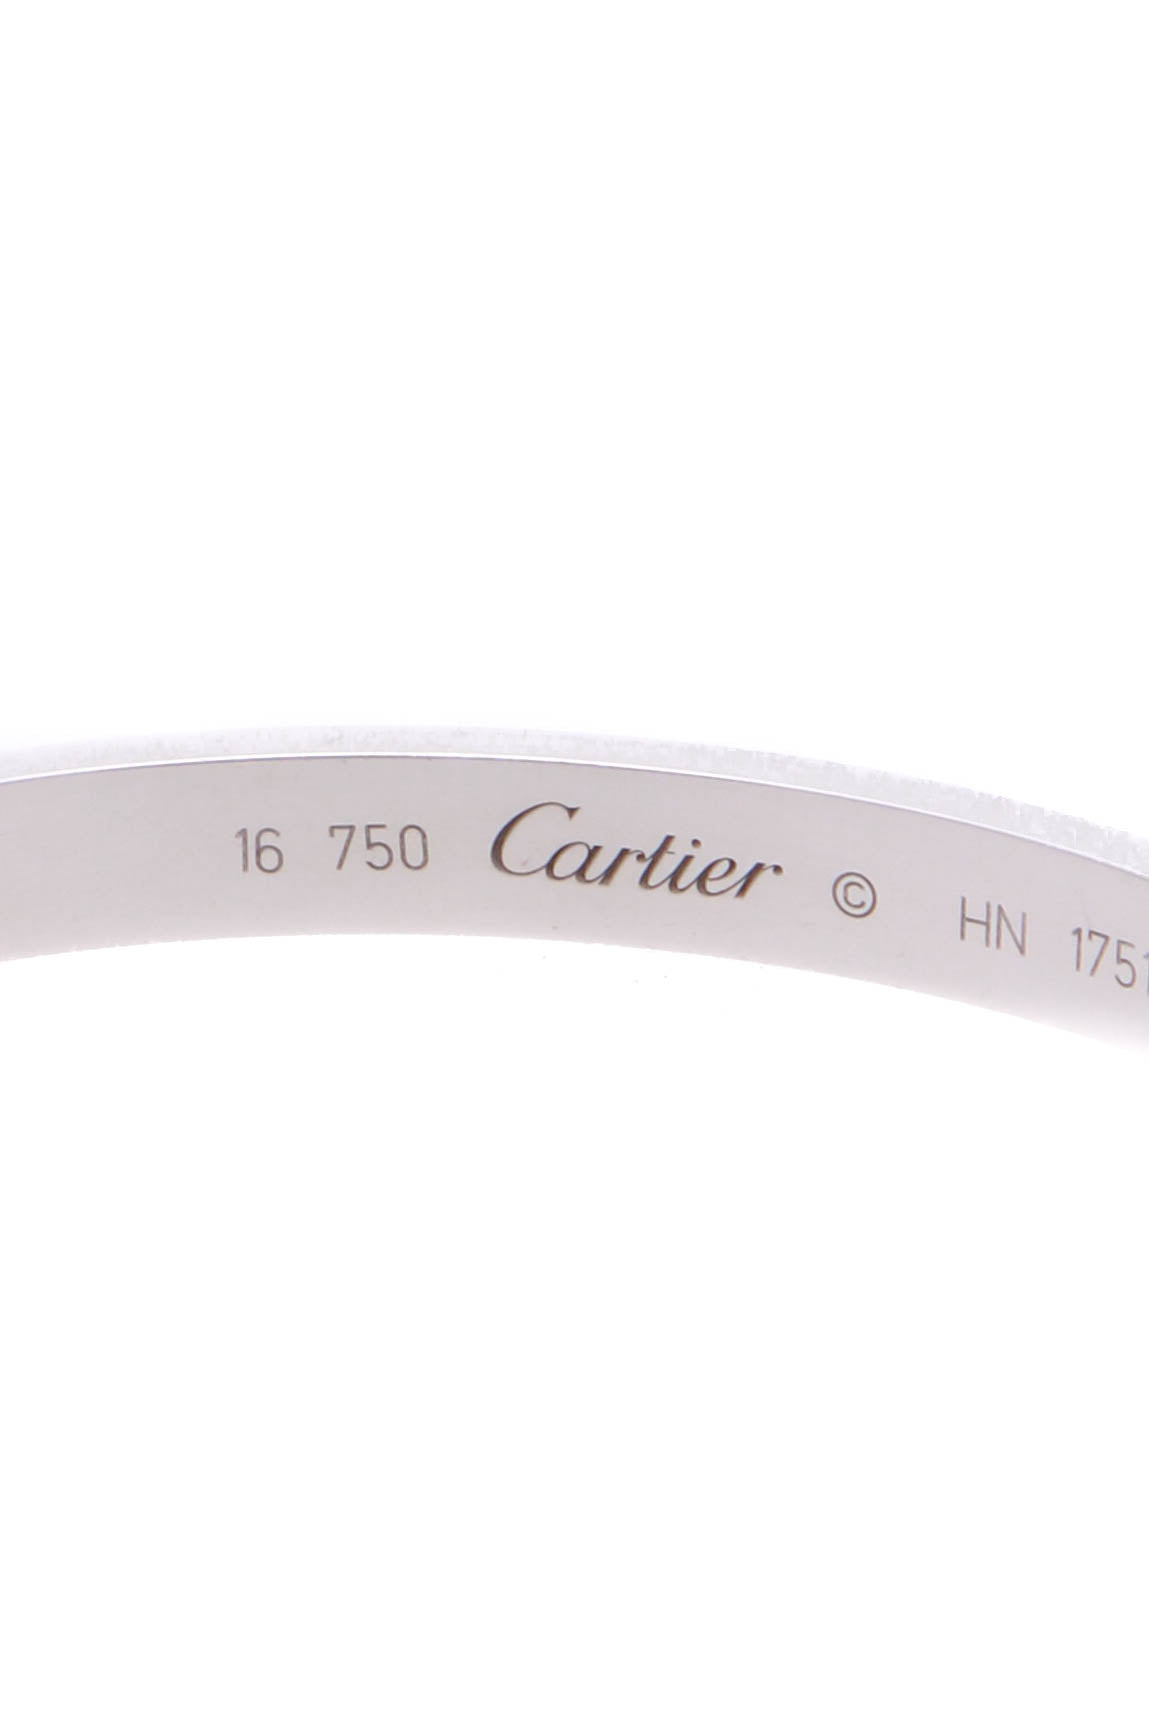 CARTIER LOVE BRACELET SMALL vs REGULAR SIZE  Which Is Right For You  My  First Luxury  YouTube